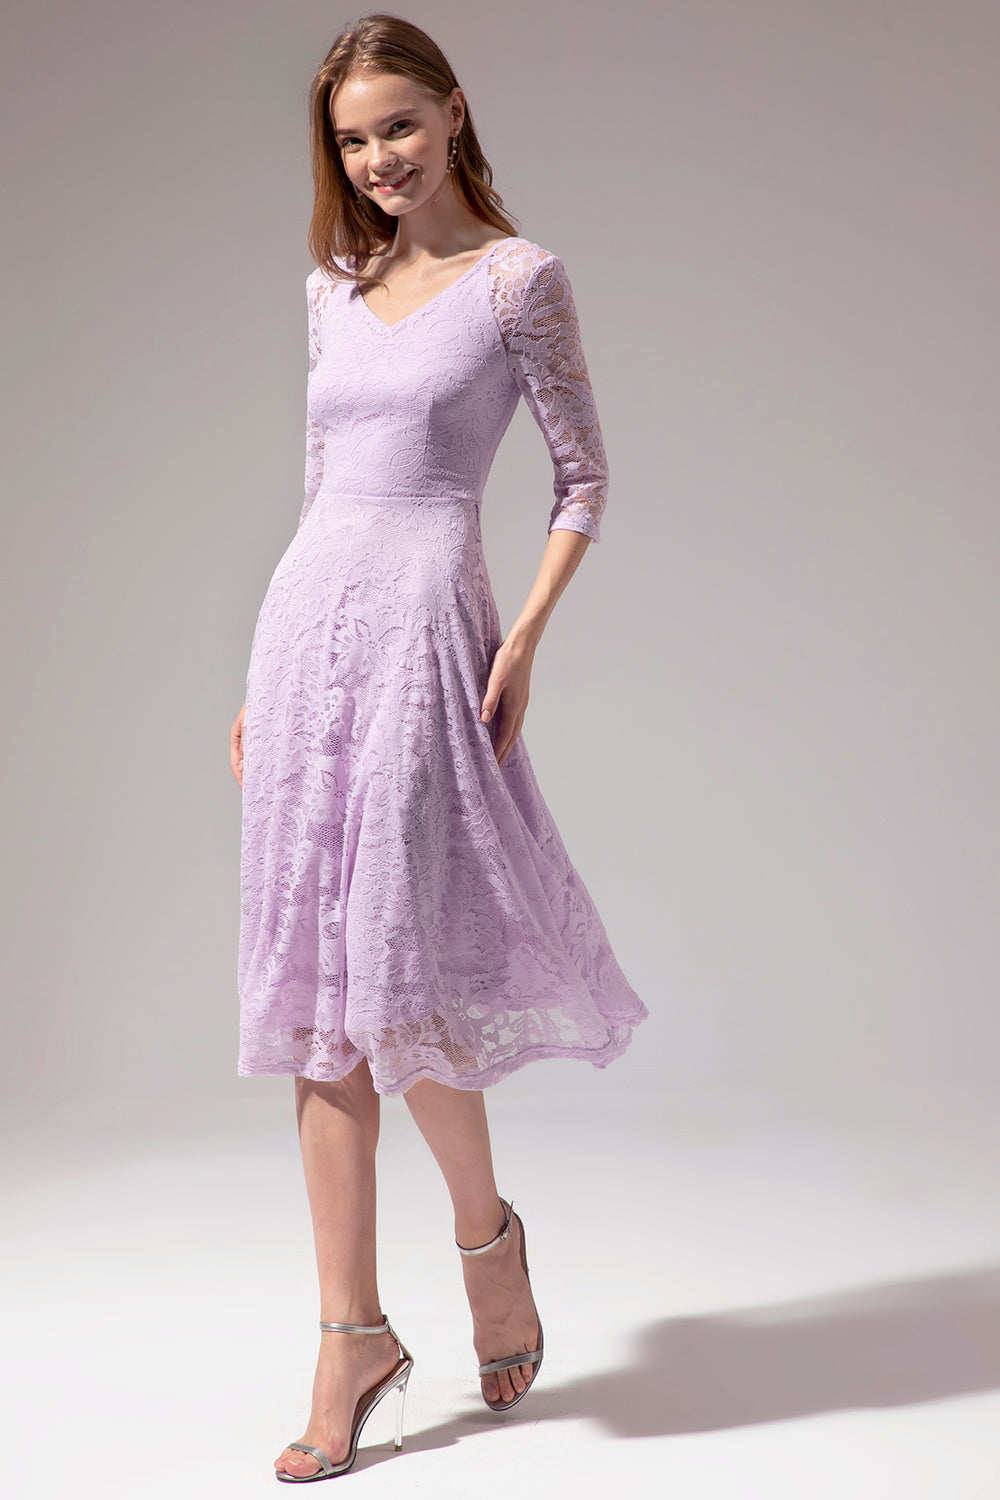 Midi Lace Dress with Long Sleeves